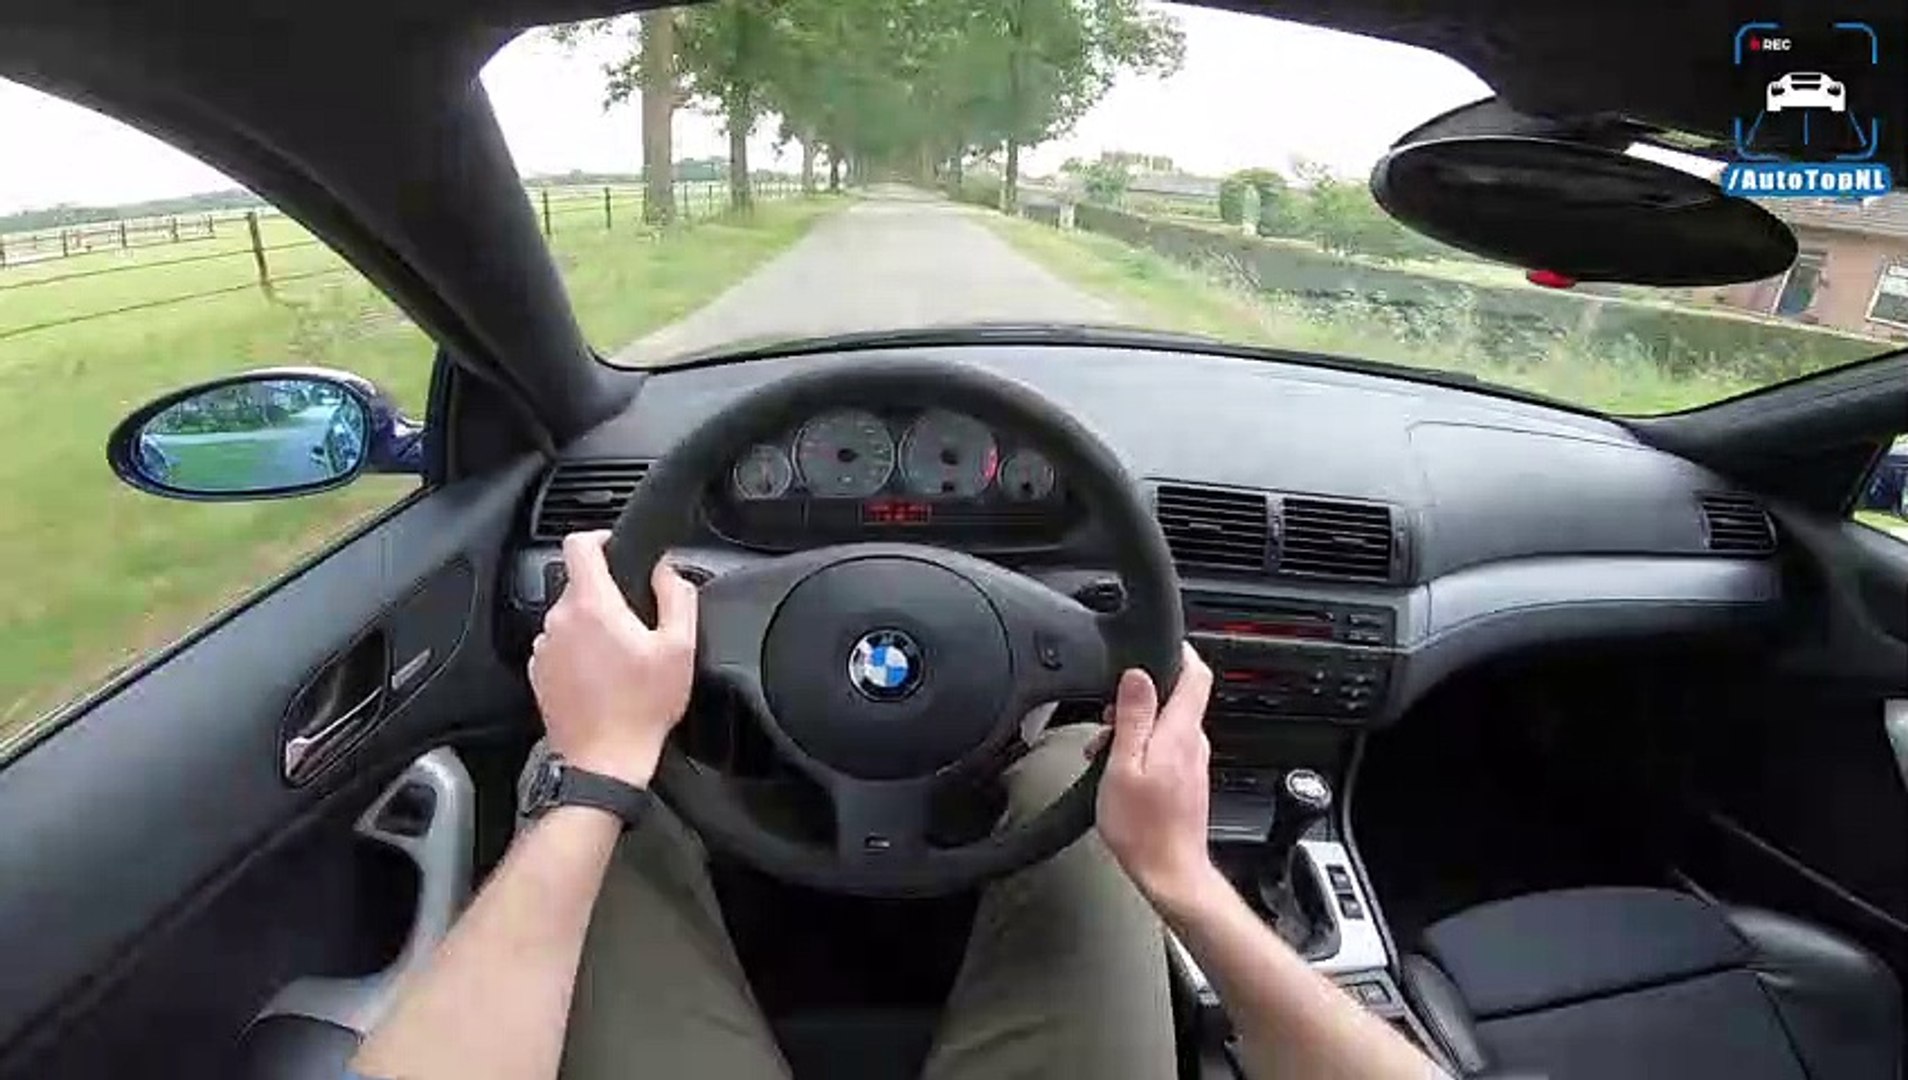 BMW M3 E46 CS / Competition POV Test Drive by AutoTopNL - Dailymotion Video